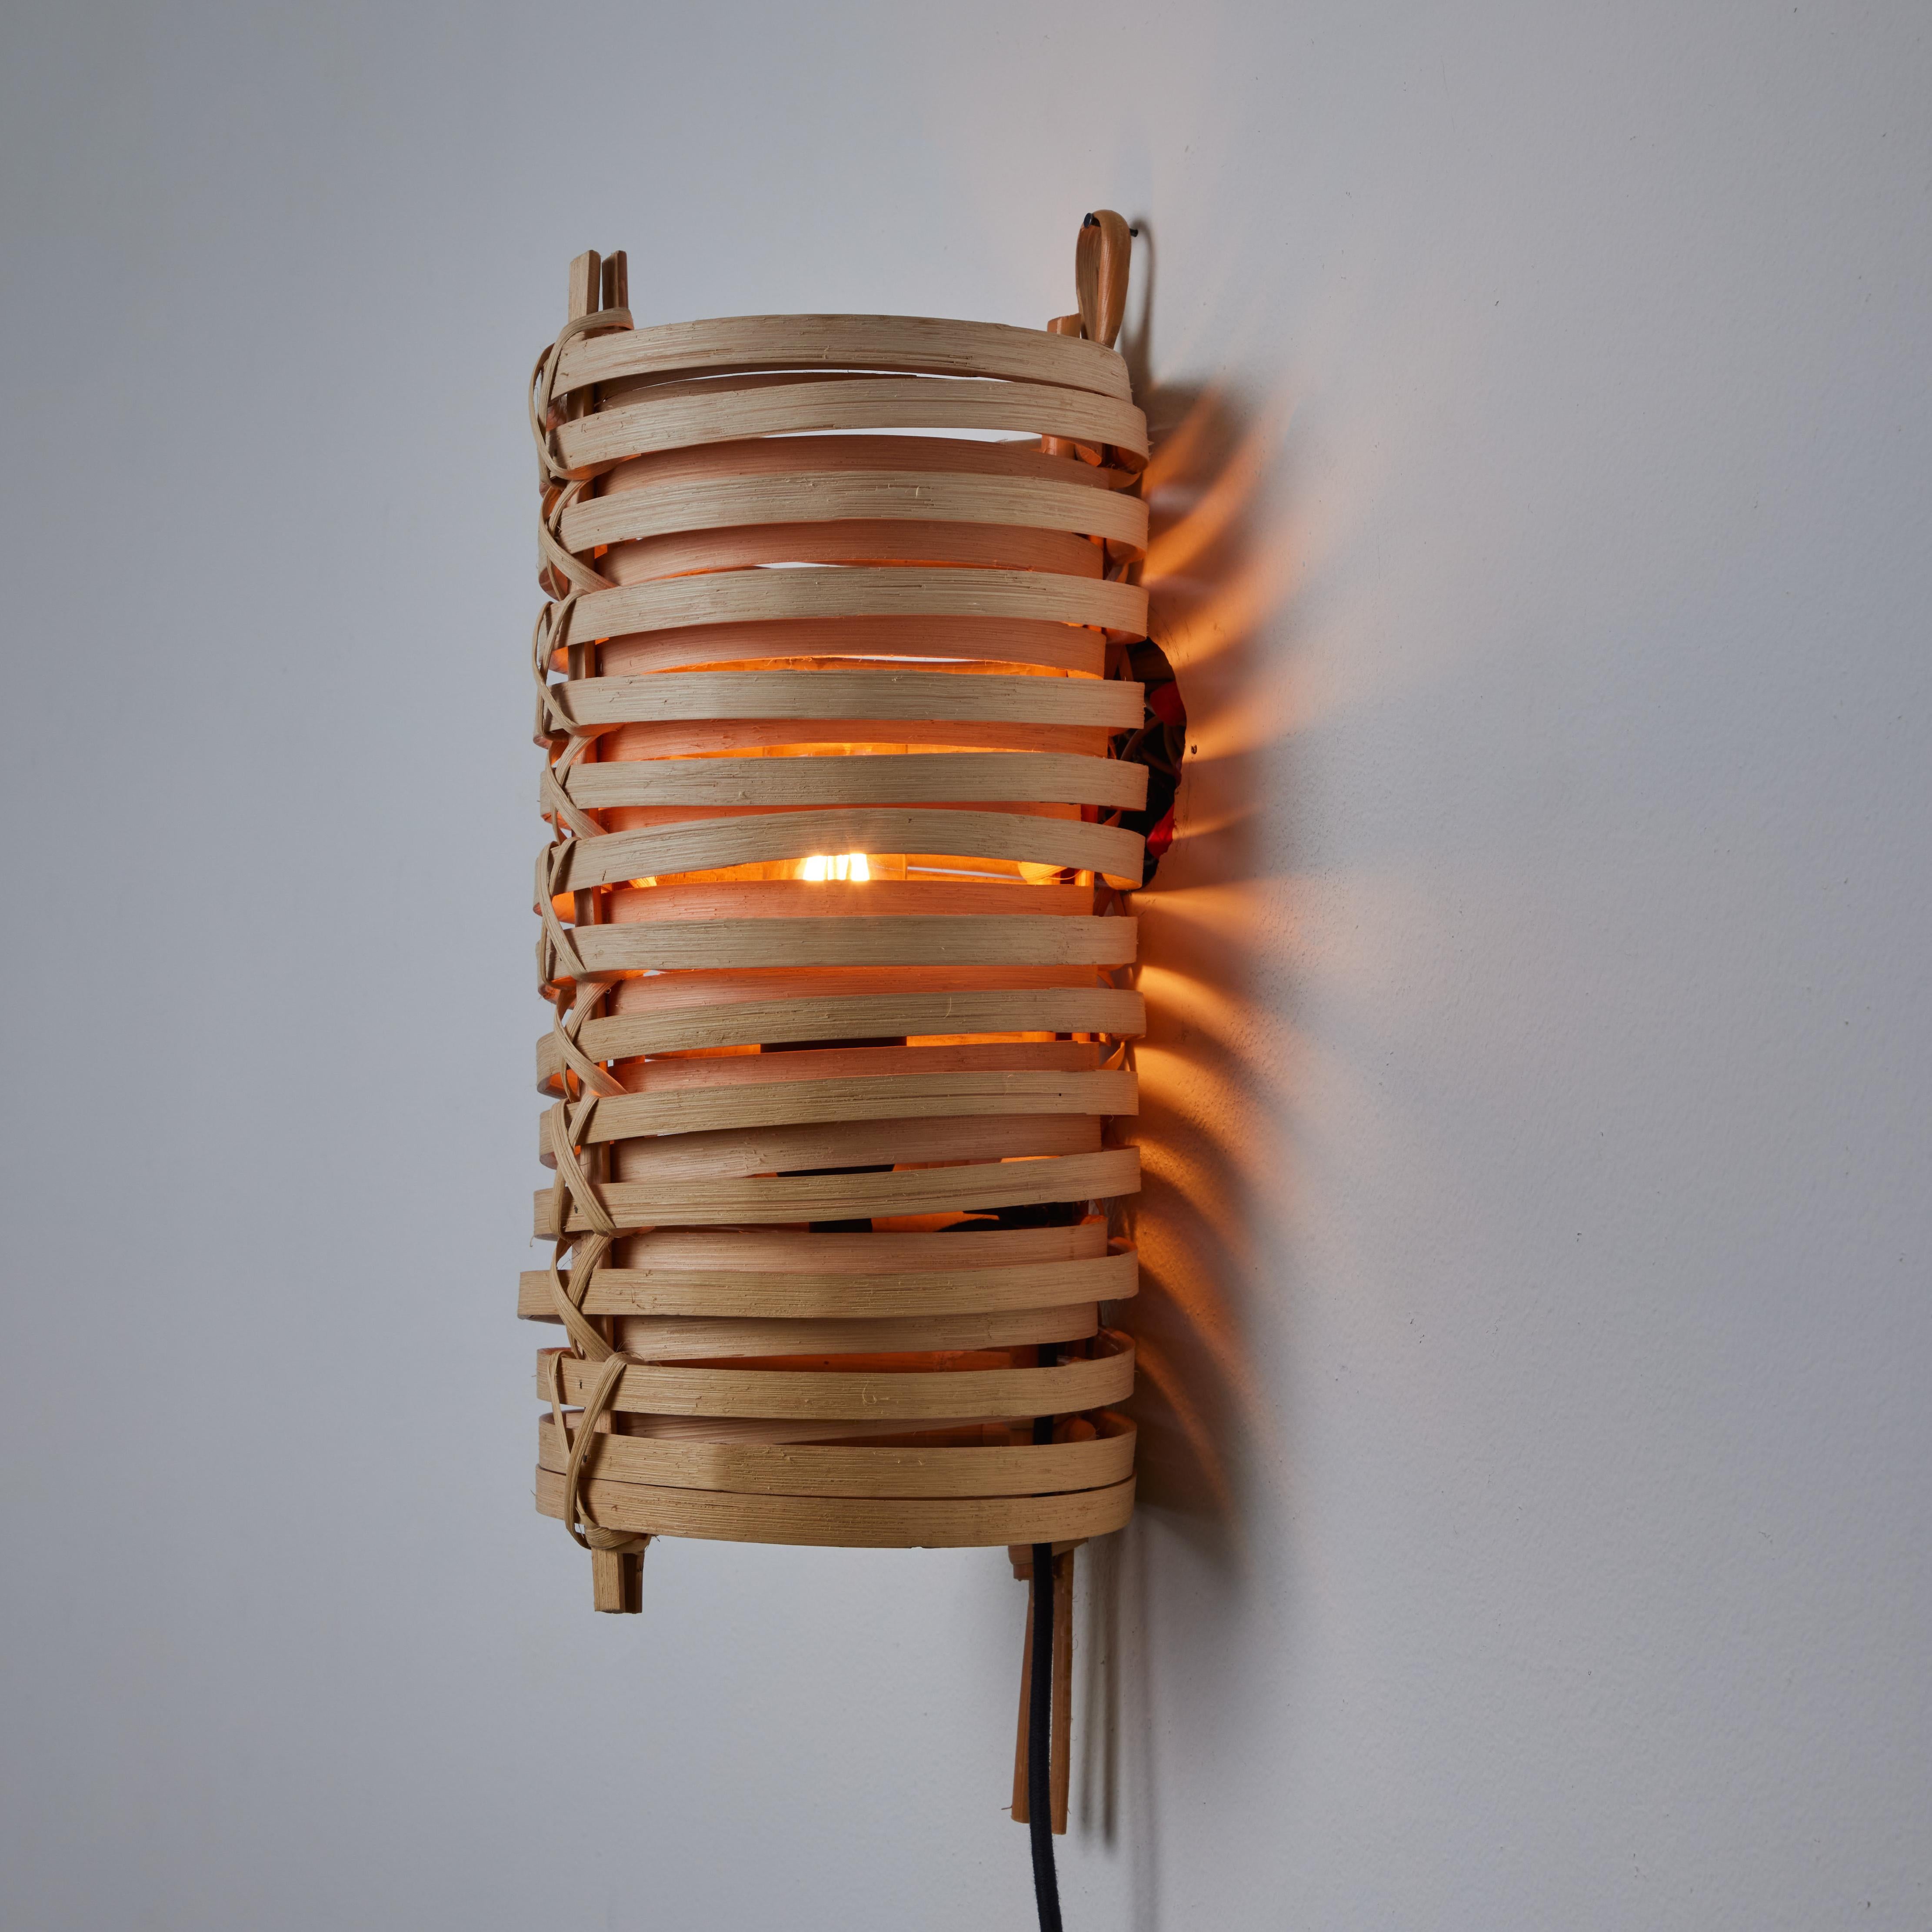 J.A. Coderch 'Junco' Rattan Cane Wall Lamp for Tunds For Sale 9